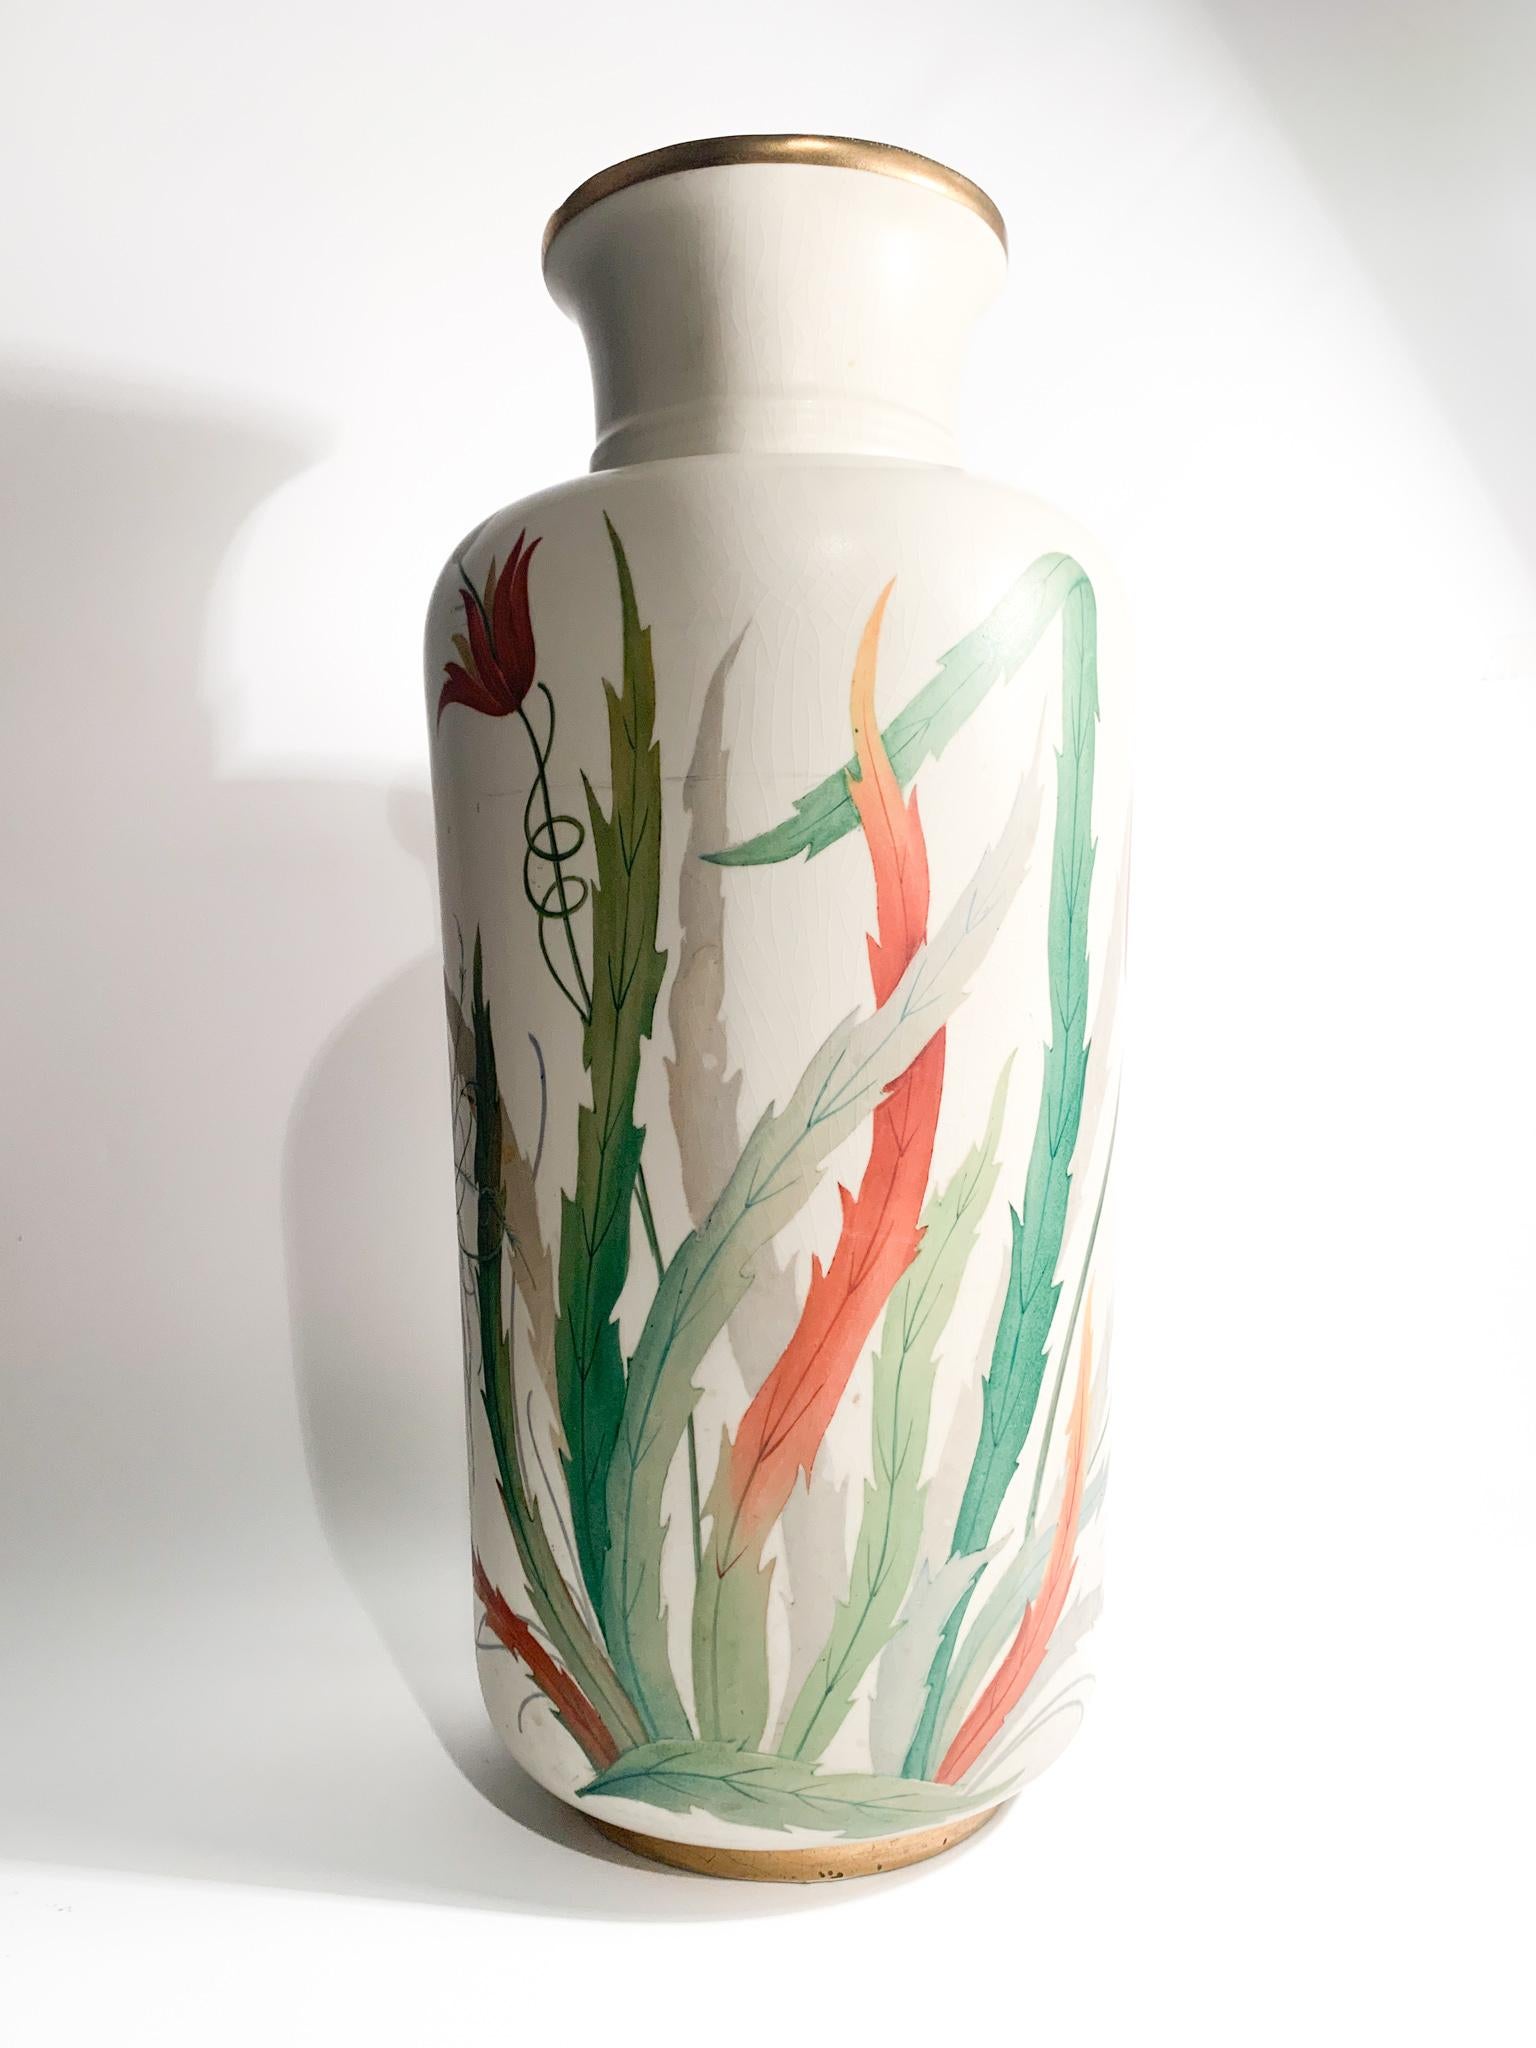 Porcelain Vase by Richard Ginori Hand Painted from the 1920s For Sale 7